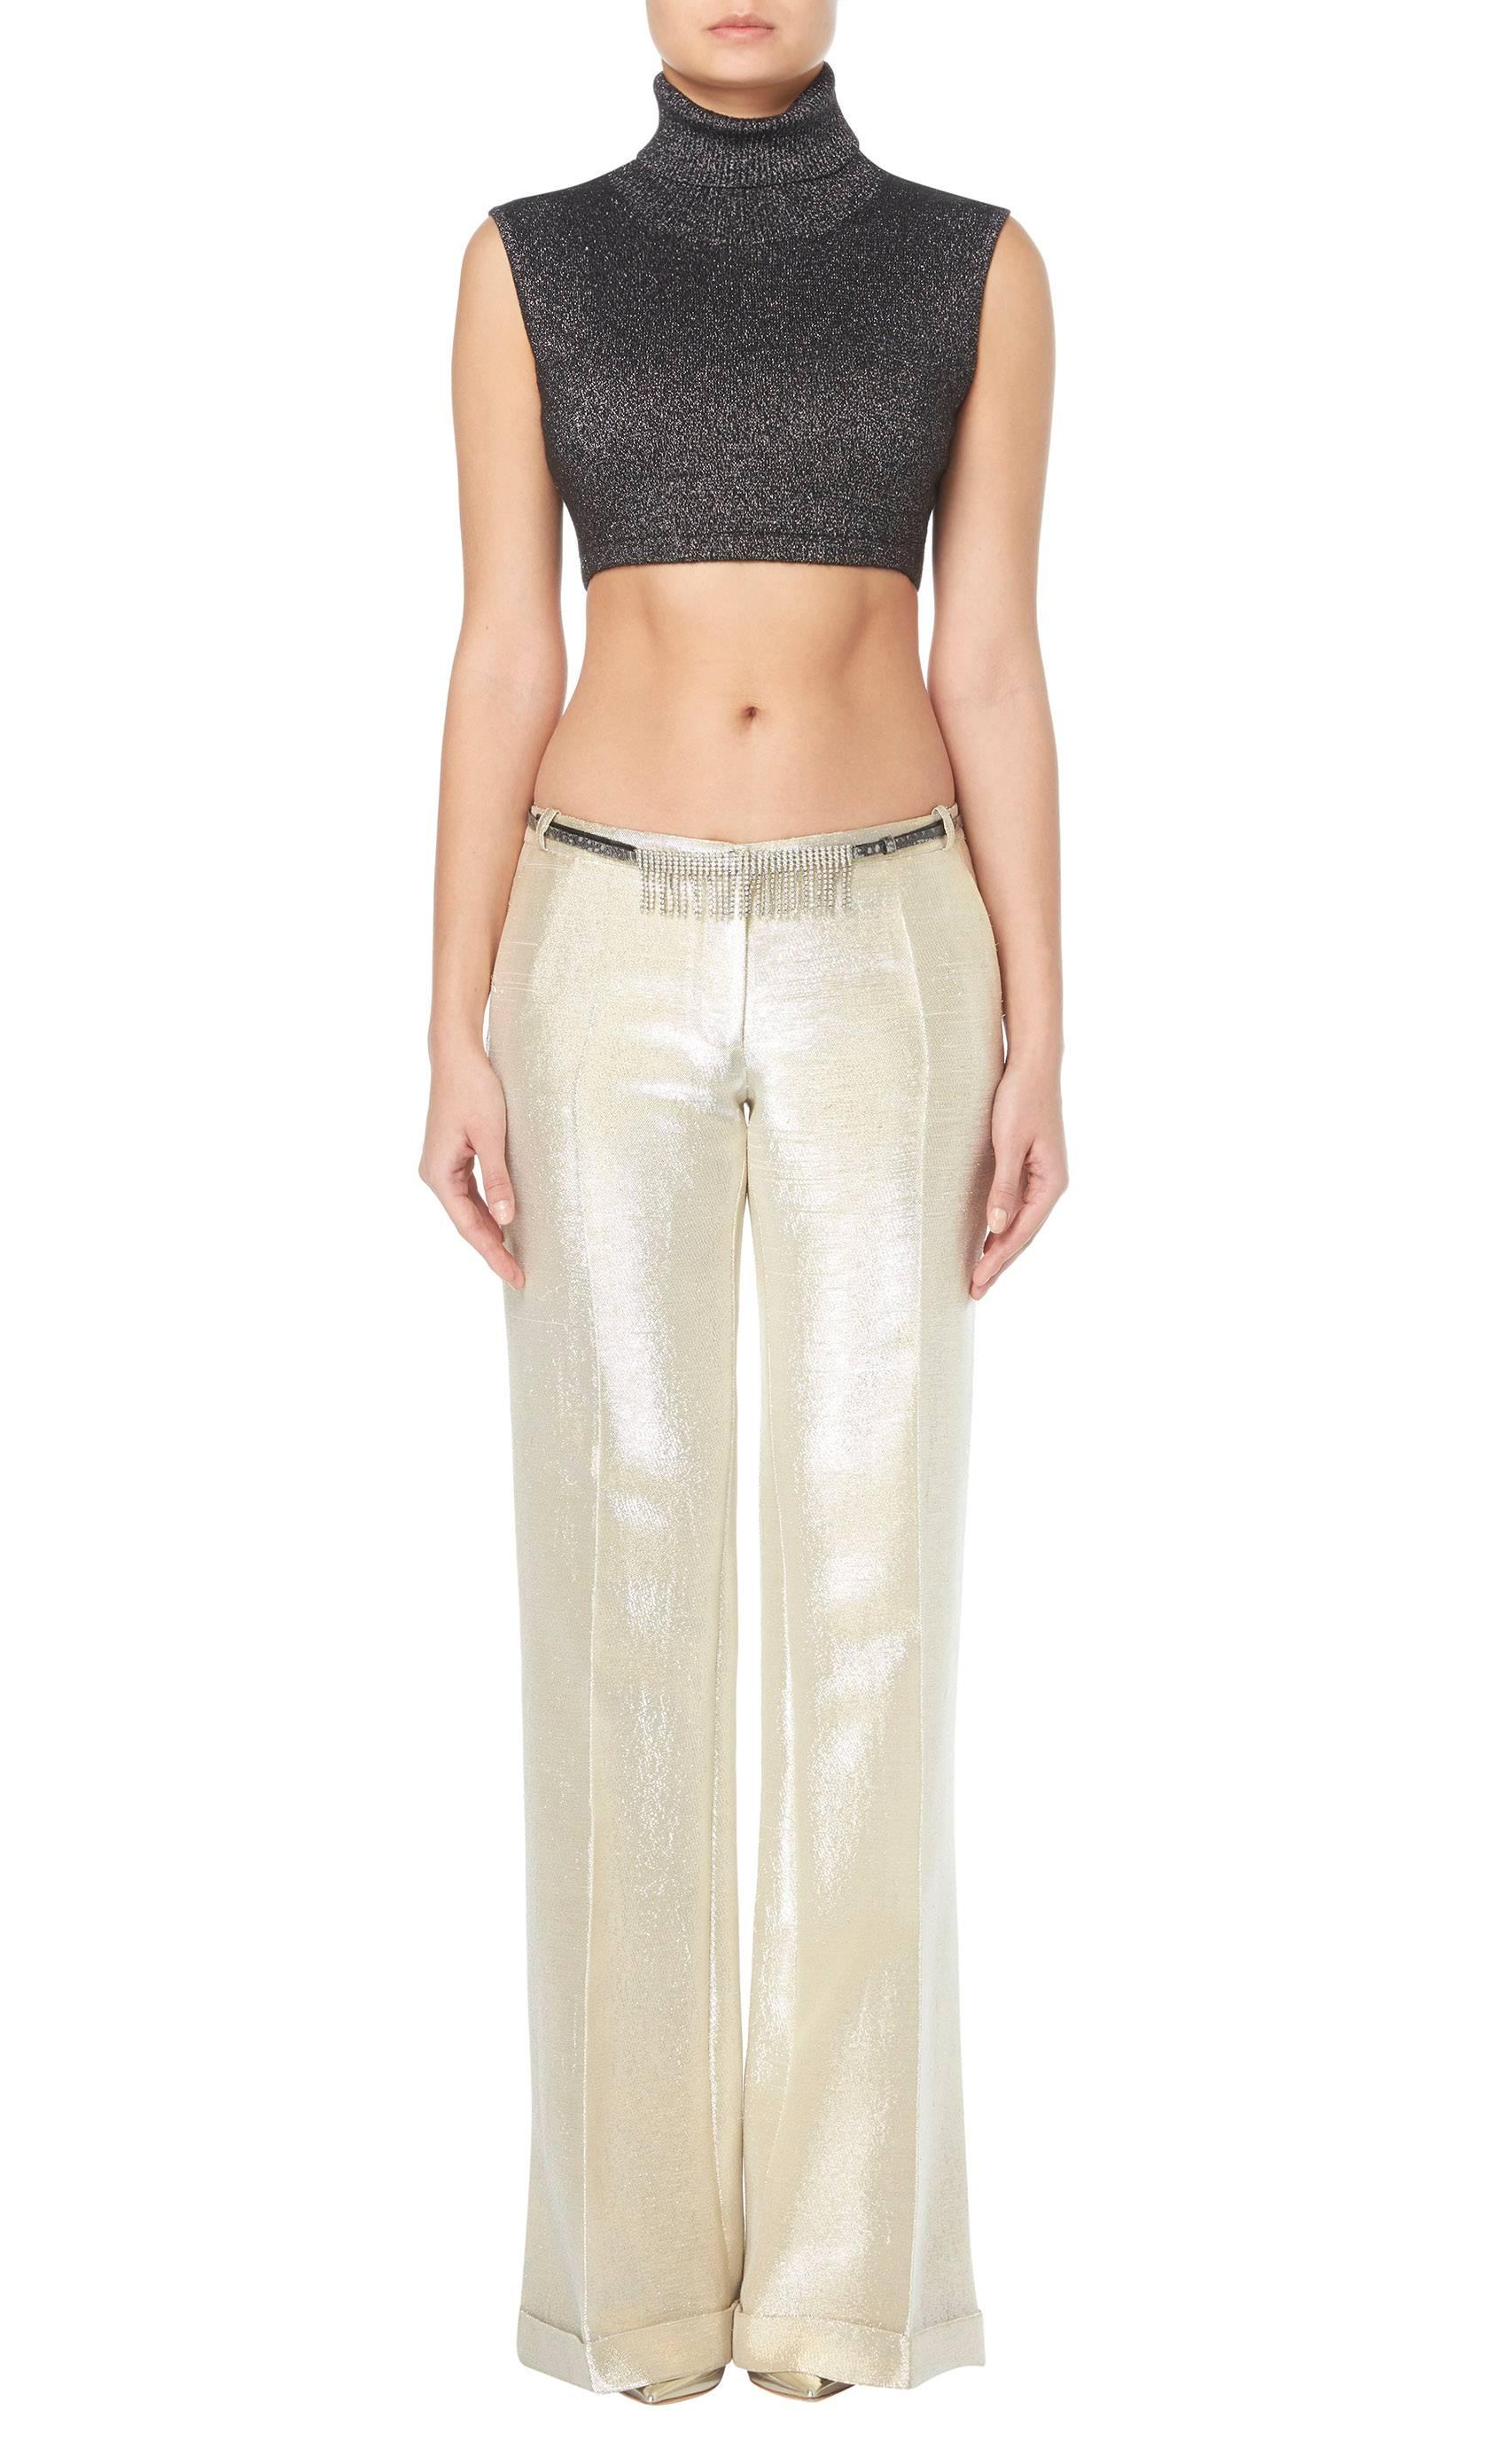 Work a little 90s into the wardrobe with this Balmain two piece. This fabulous ensemble is made up of a cropped sweater vest in black and silver Lurex with, flared metallic lurex trousers and a crystal studded belt.

Constructed in metallic silver